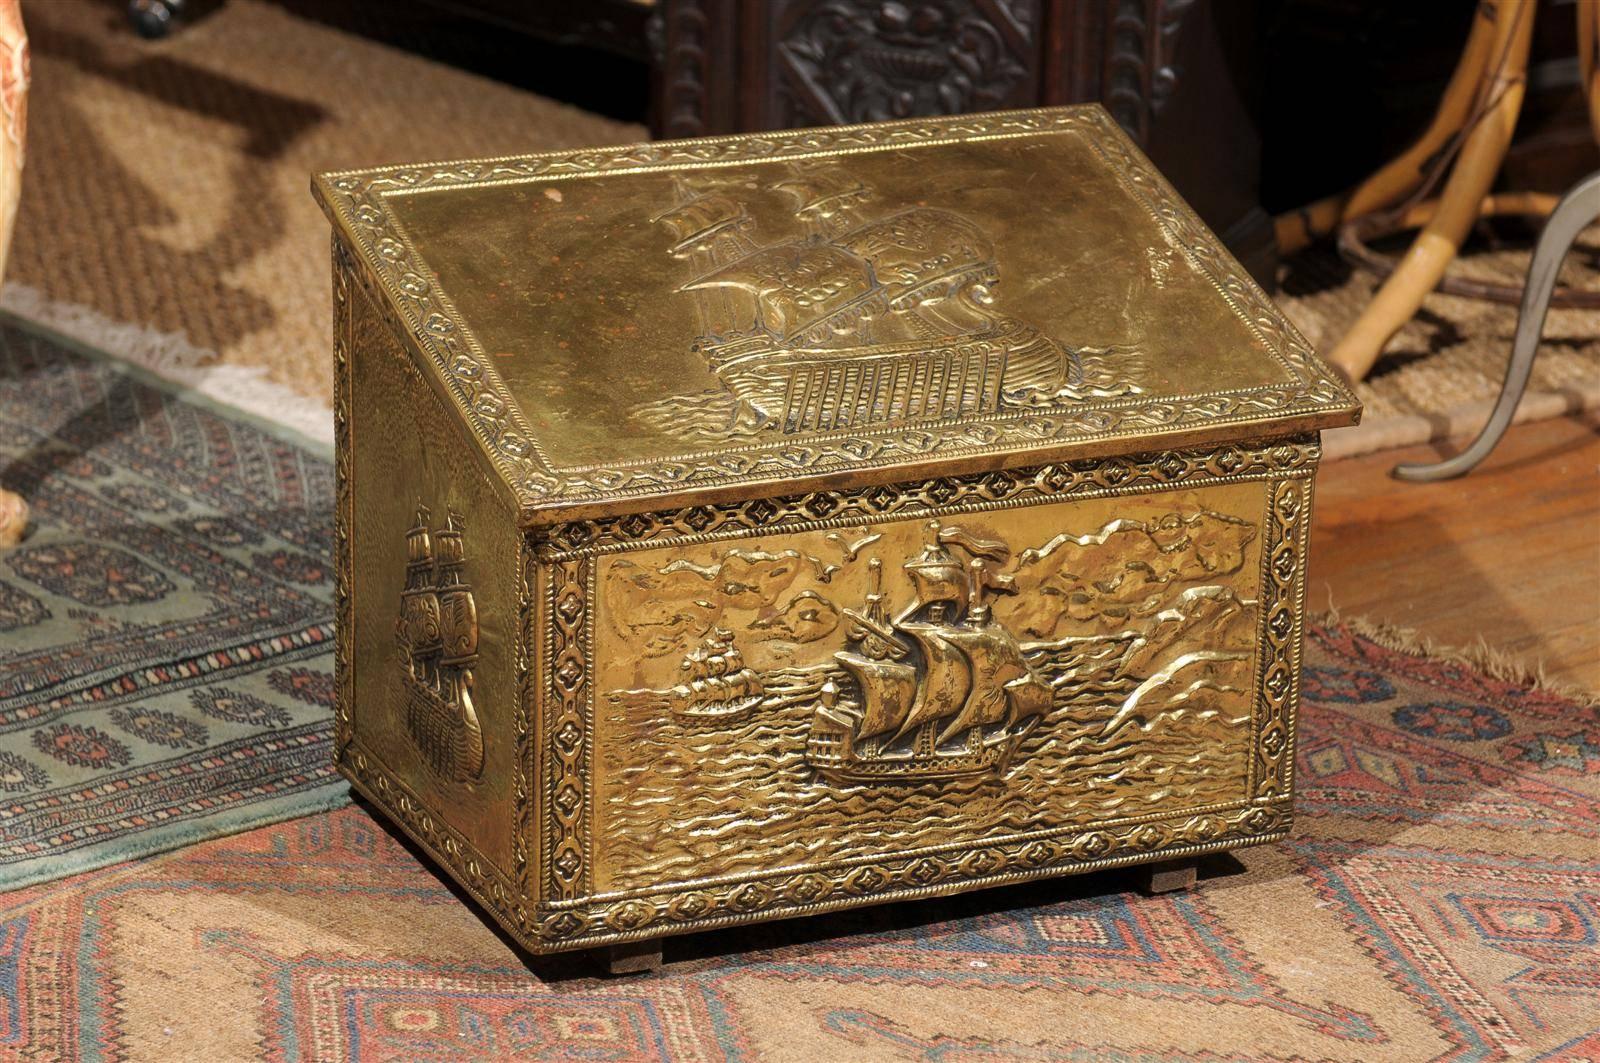 20th century English fireside coal hod or scuttle having a wood interior and covered with brass embossed with nautical ship motifs. Stamped Peerage England.